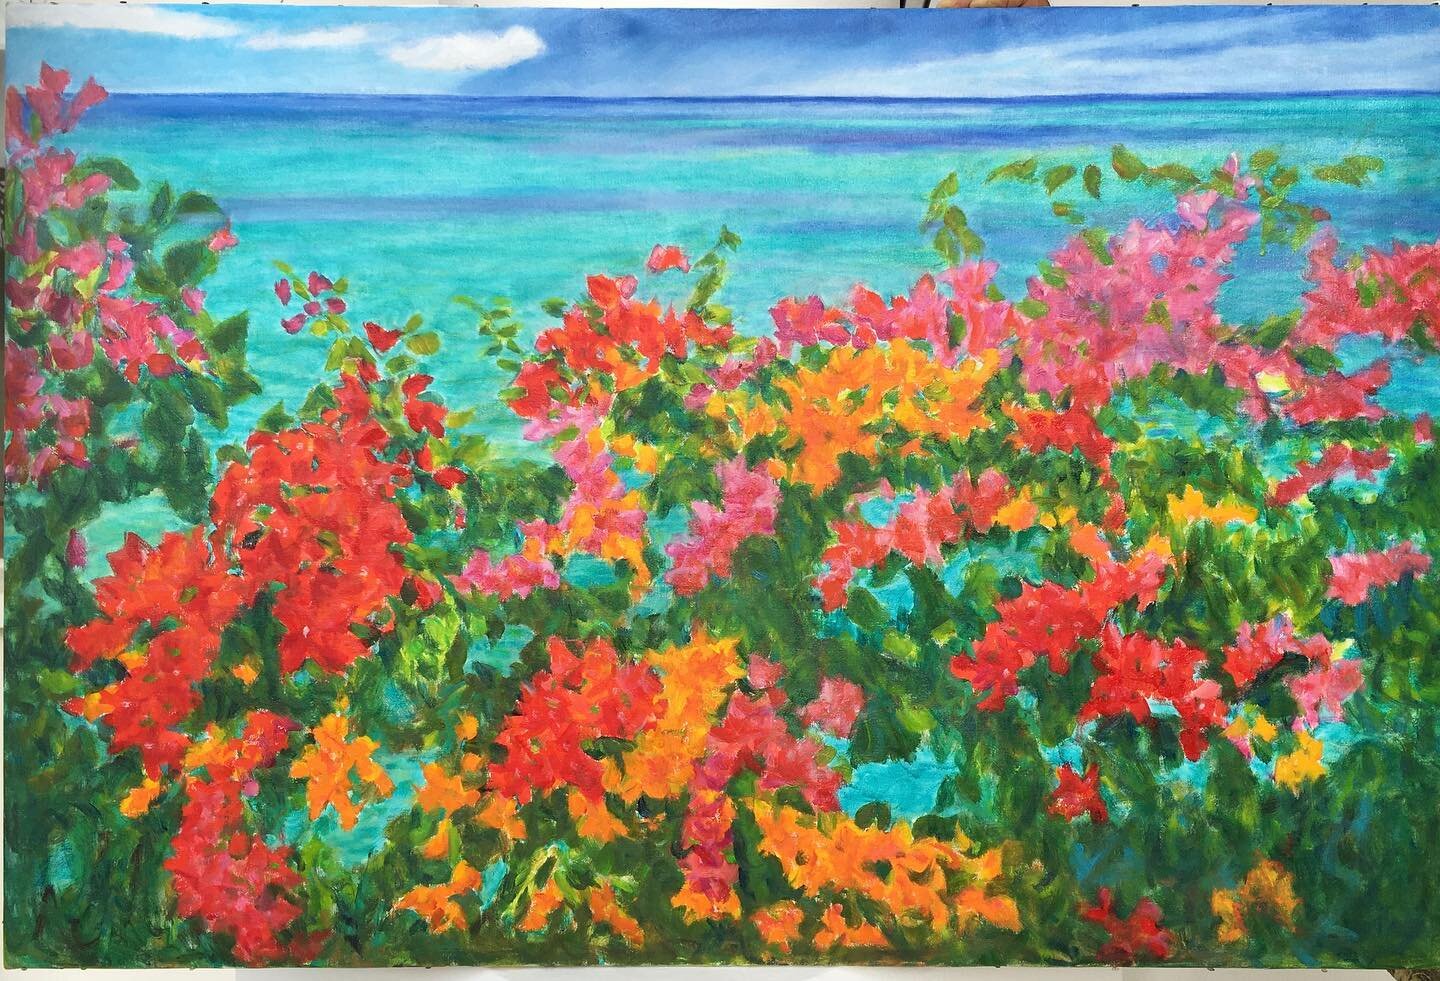 New Debut! 
Sir Roland Richardson Exhibition at Belmond La Samanna, &ldquo;Spring Squall with Brilliant Bougainvillea, Baie Longue&rdquo;, February 2021, 32&rdquo; x 45&rdquo; original oil painted directly from life. Spring is the season for Bougainv